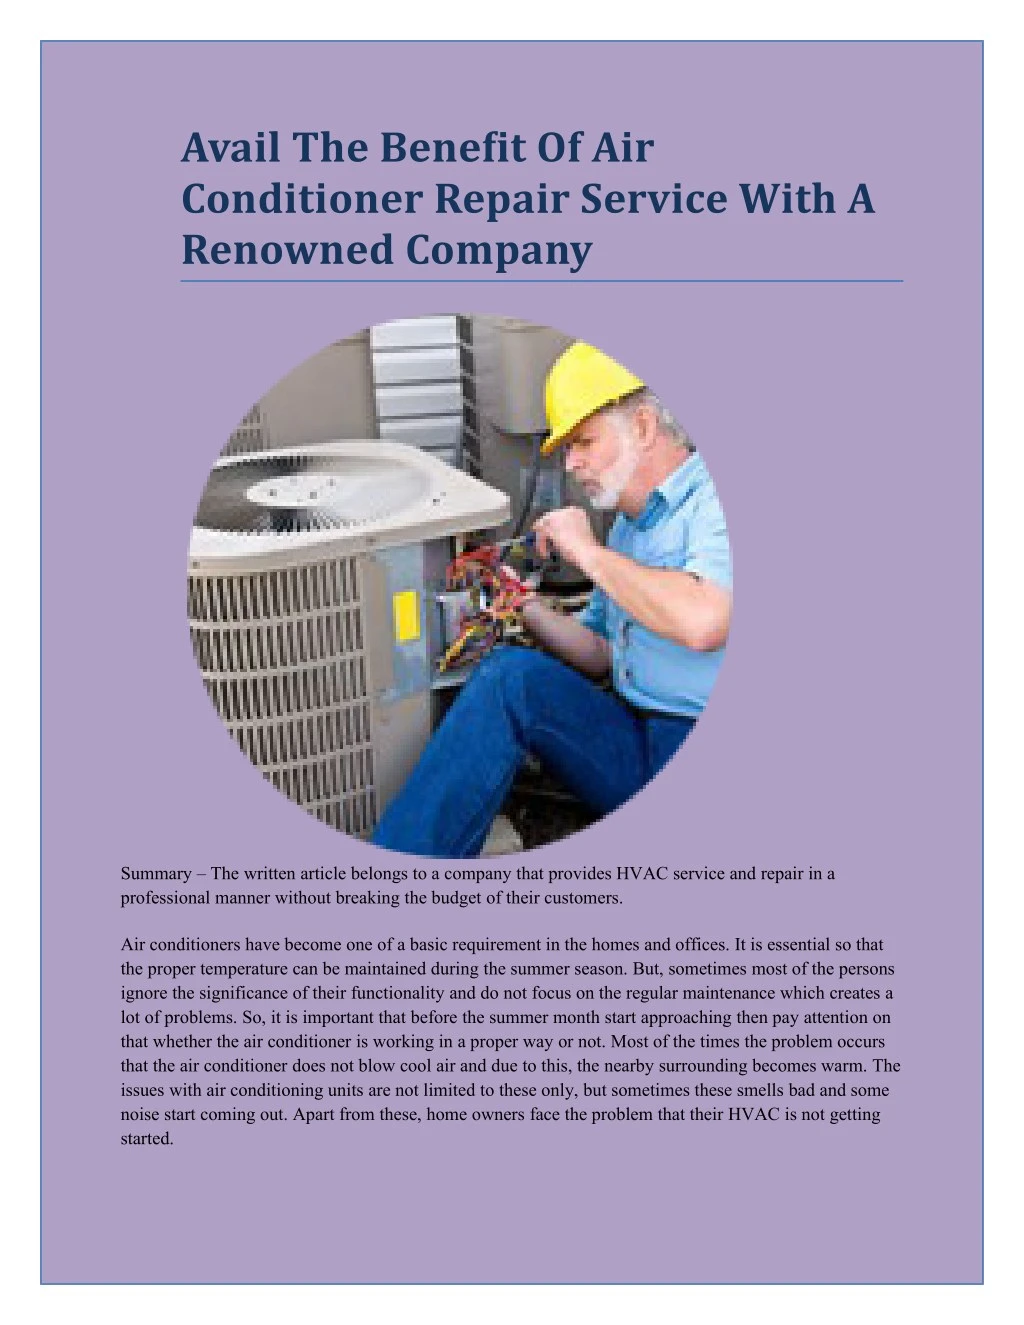 avail the benefit of air conditioner repair